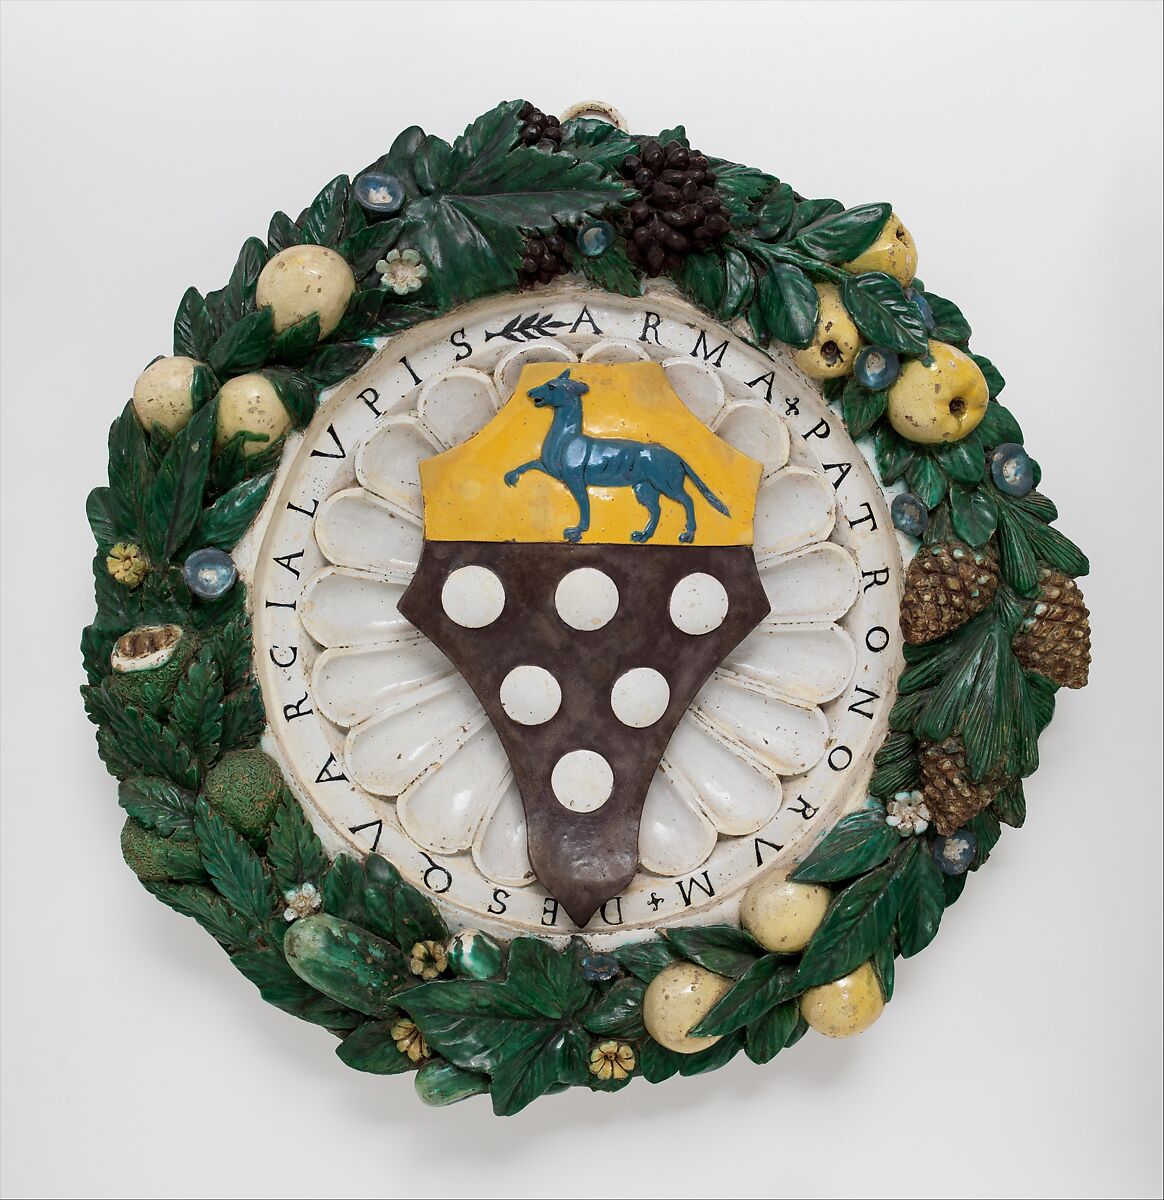 Armorial Tondo with the Arms of Squarci Lupi, School of Giovanni della Robbia (Italian, Florence 1469–1529/30 Florence), Painted and glazed terracotta, Italian, Florence 